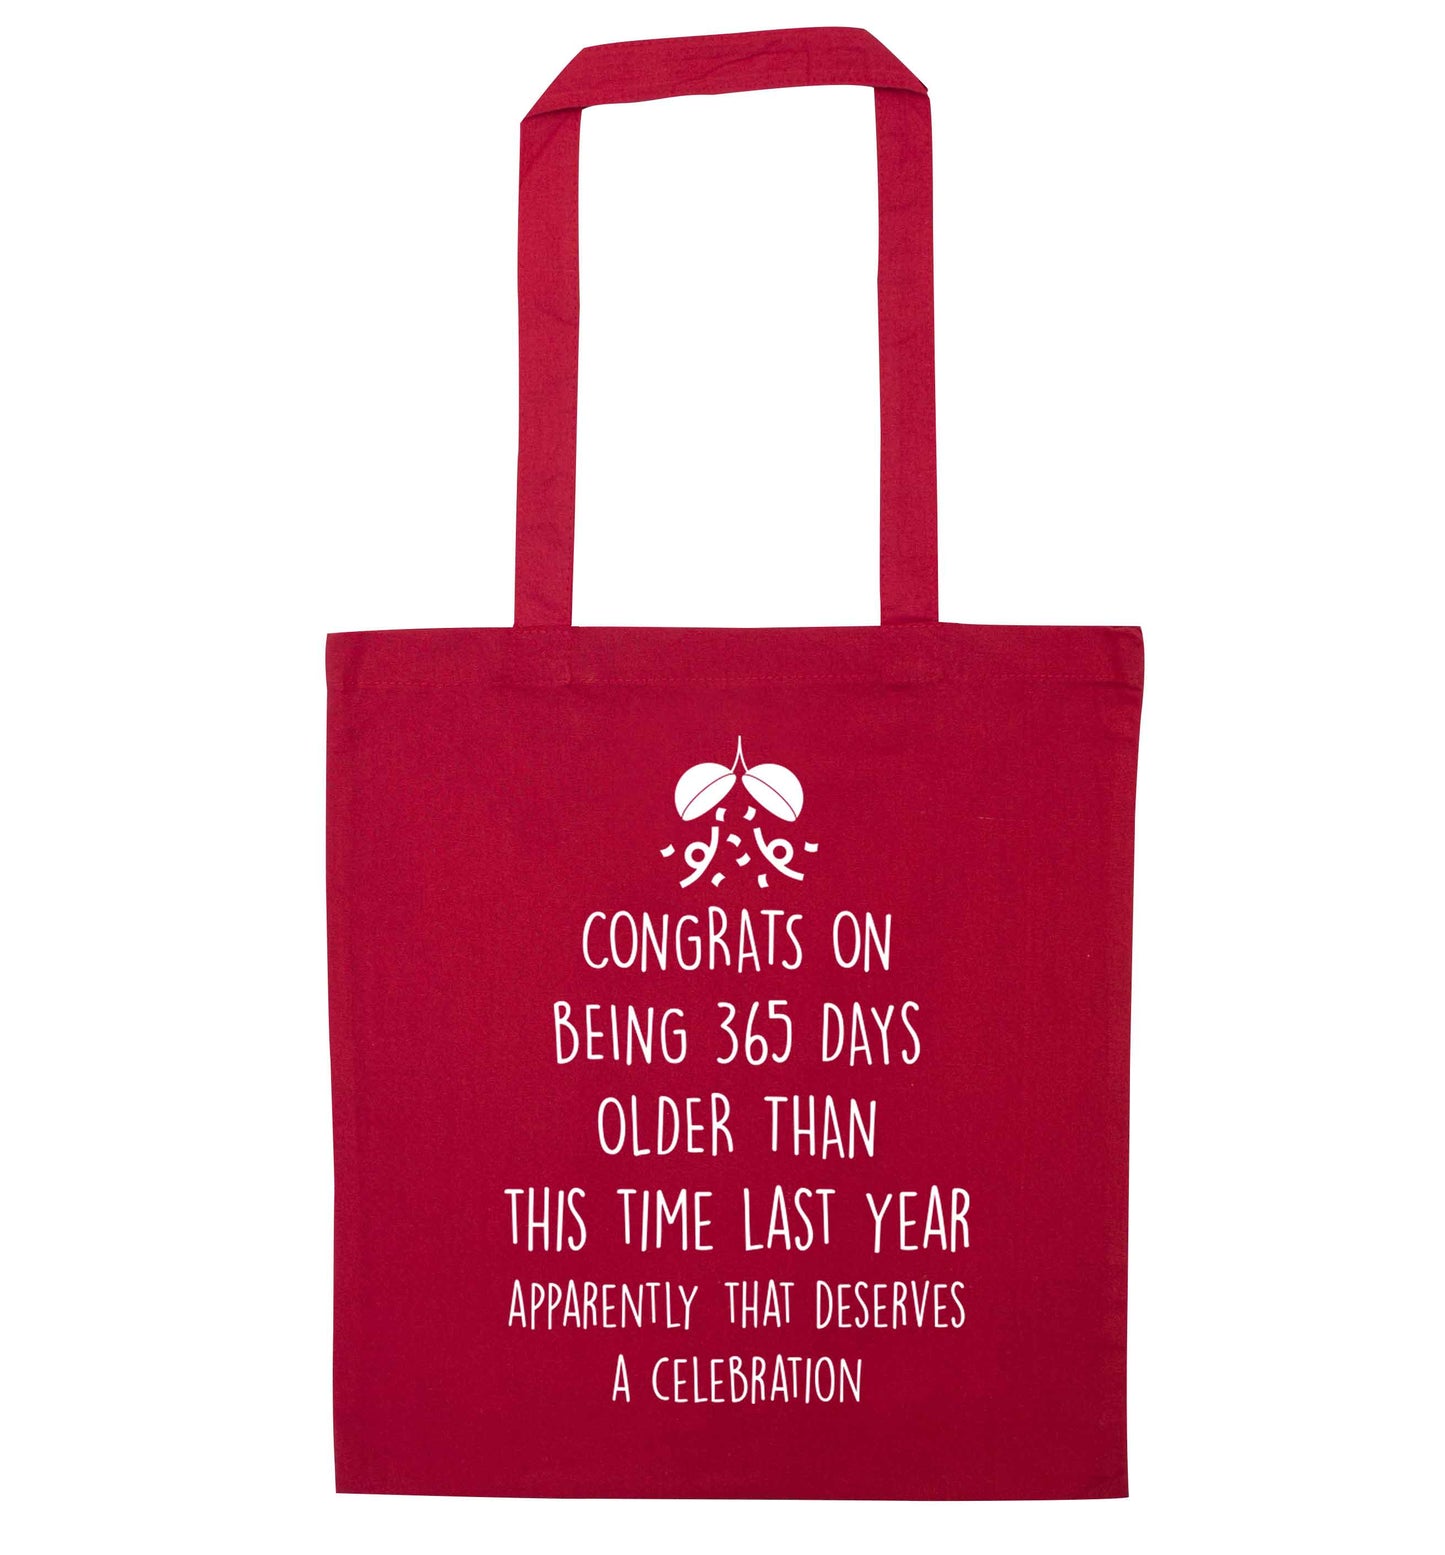 Congrats on being 365 days older than you were this time last year apparently that deserves a celebration red tote bag